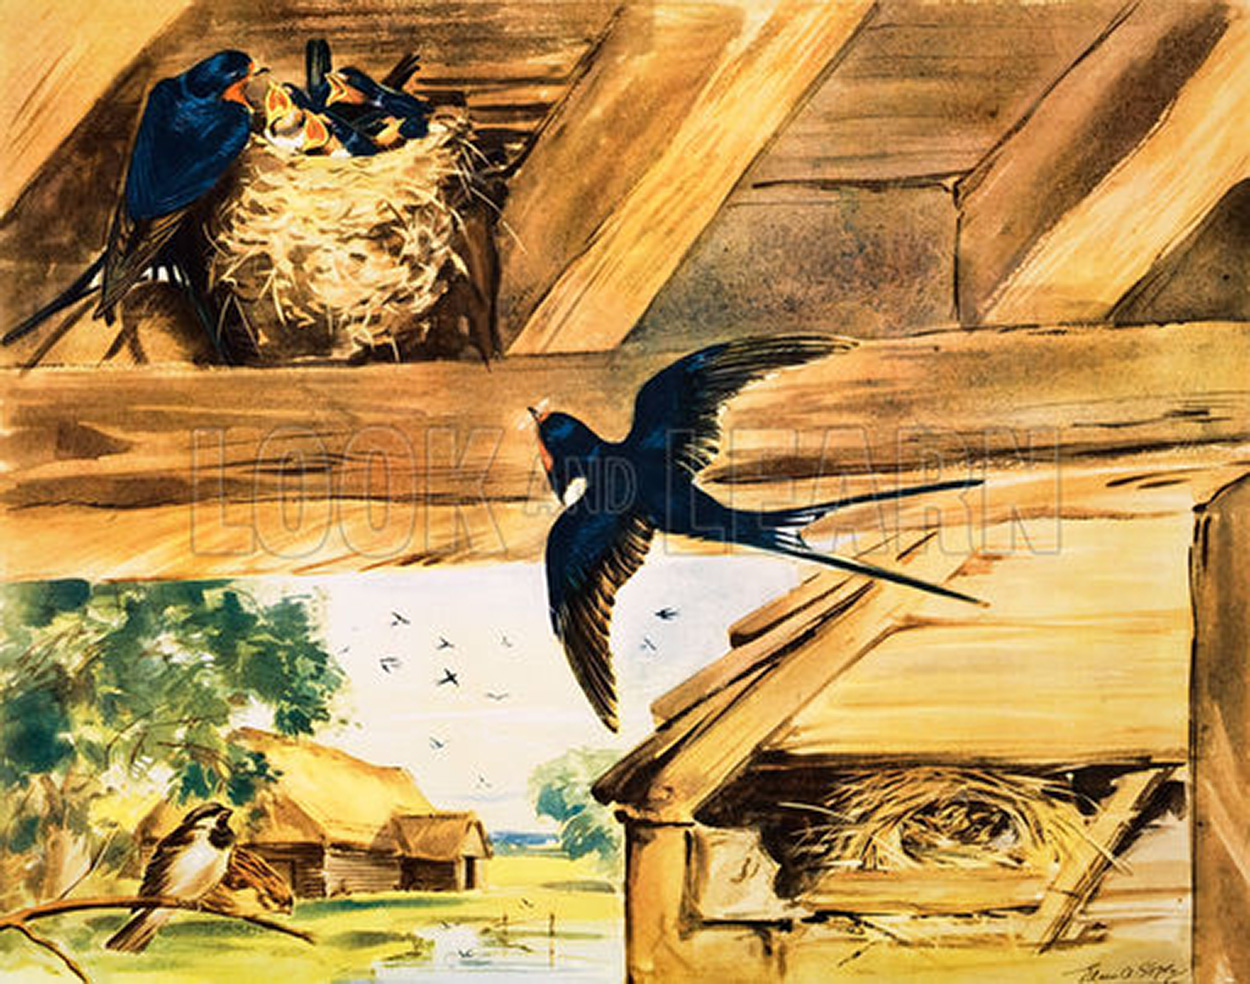 The Swallows in the Barn (Original Macmillan Poster) (Print) art by Eileen Soper at The Illustration Art Gallery